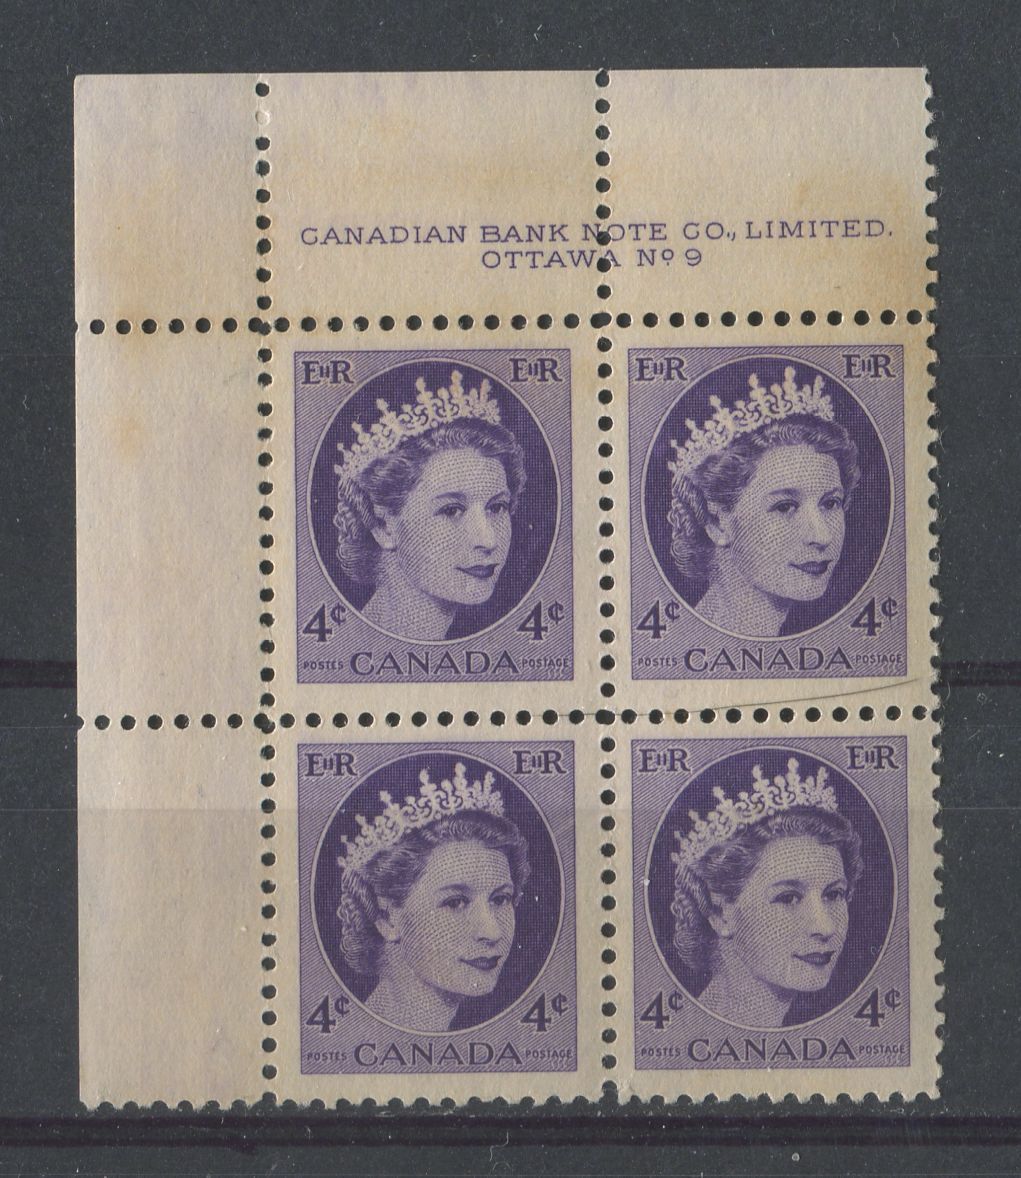 Canada #340 (SG#466) 4c Bluish Violet 1954 Wilding Issue Plate 9 UL DF Ivory Smooth Paper F-70 NH Brixton Chrome 